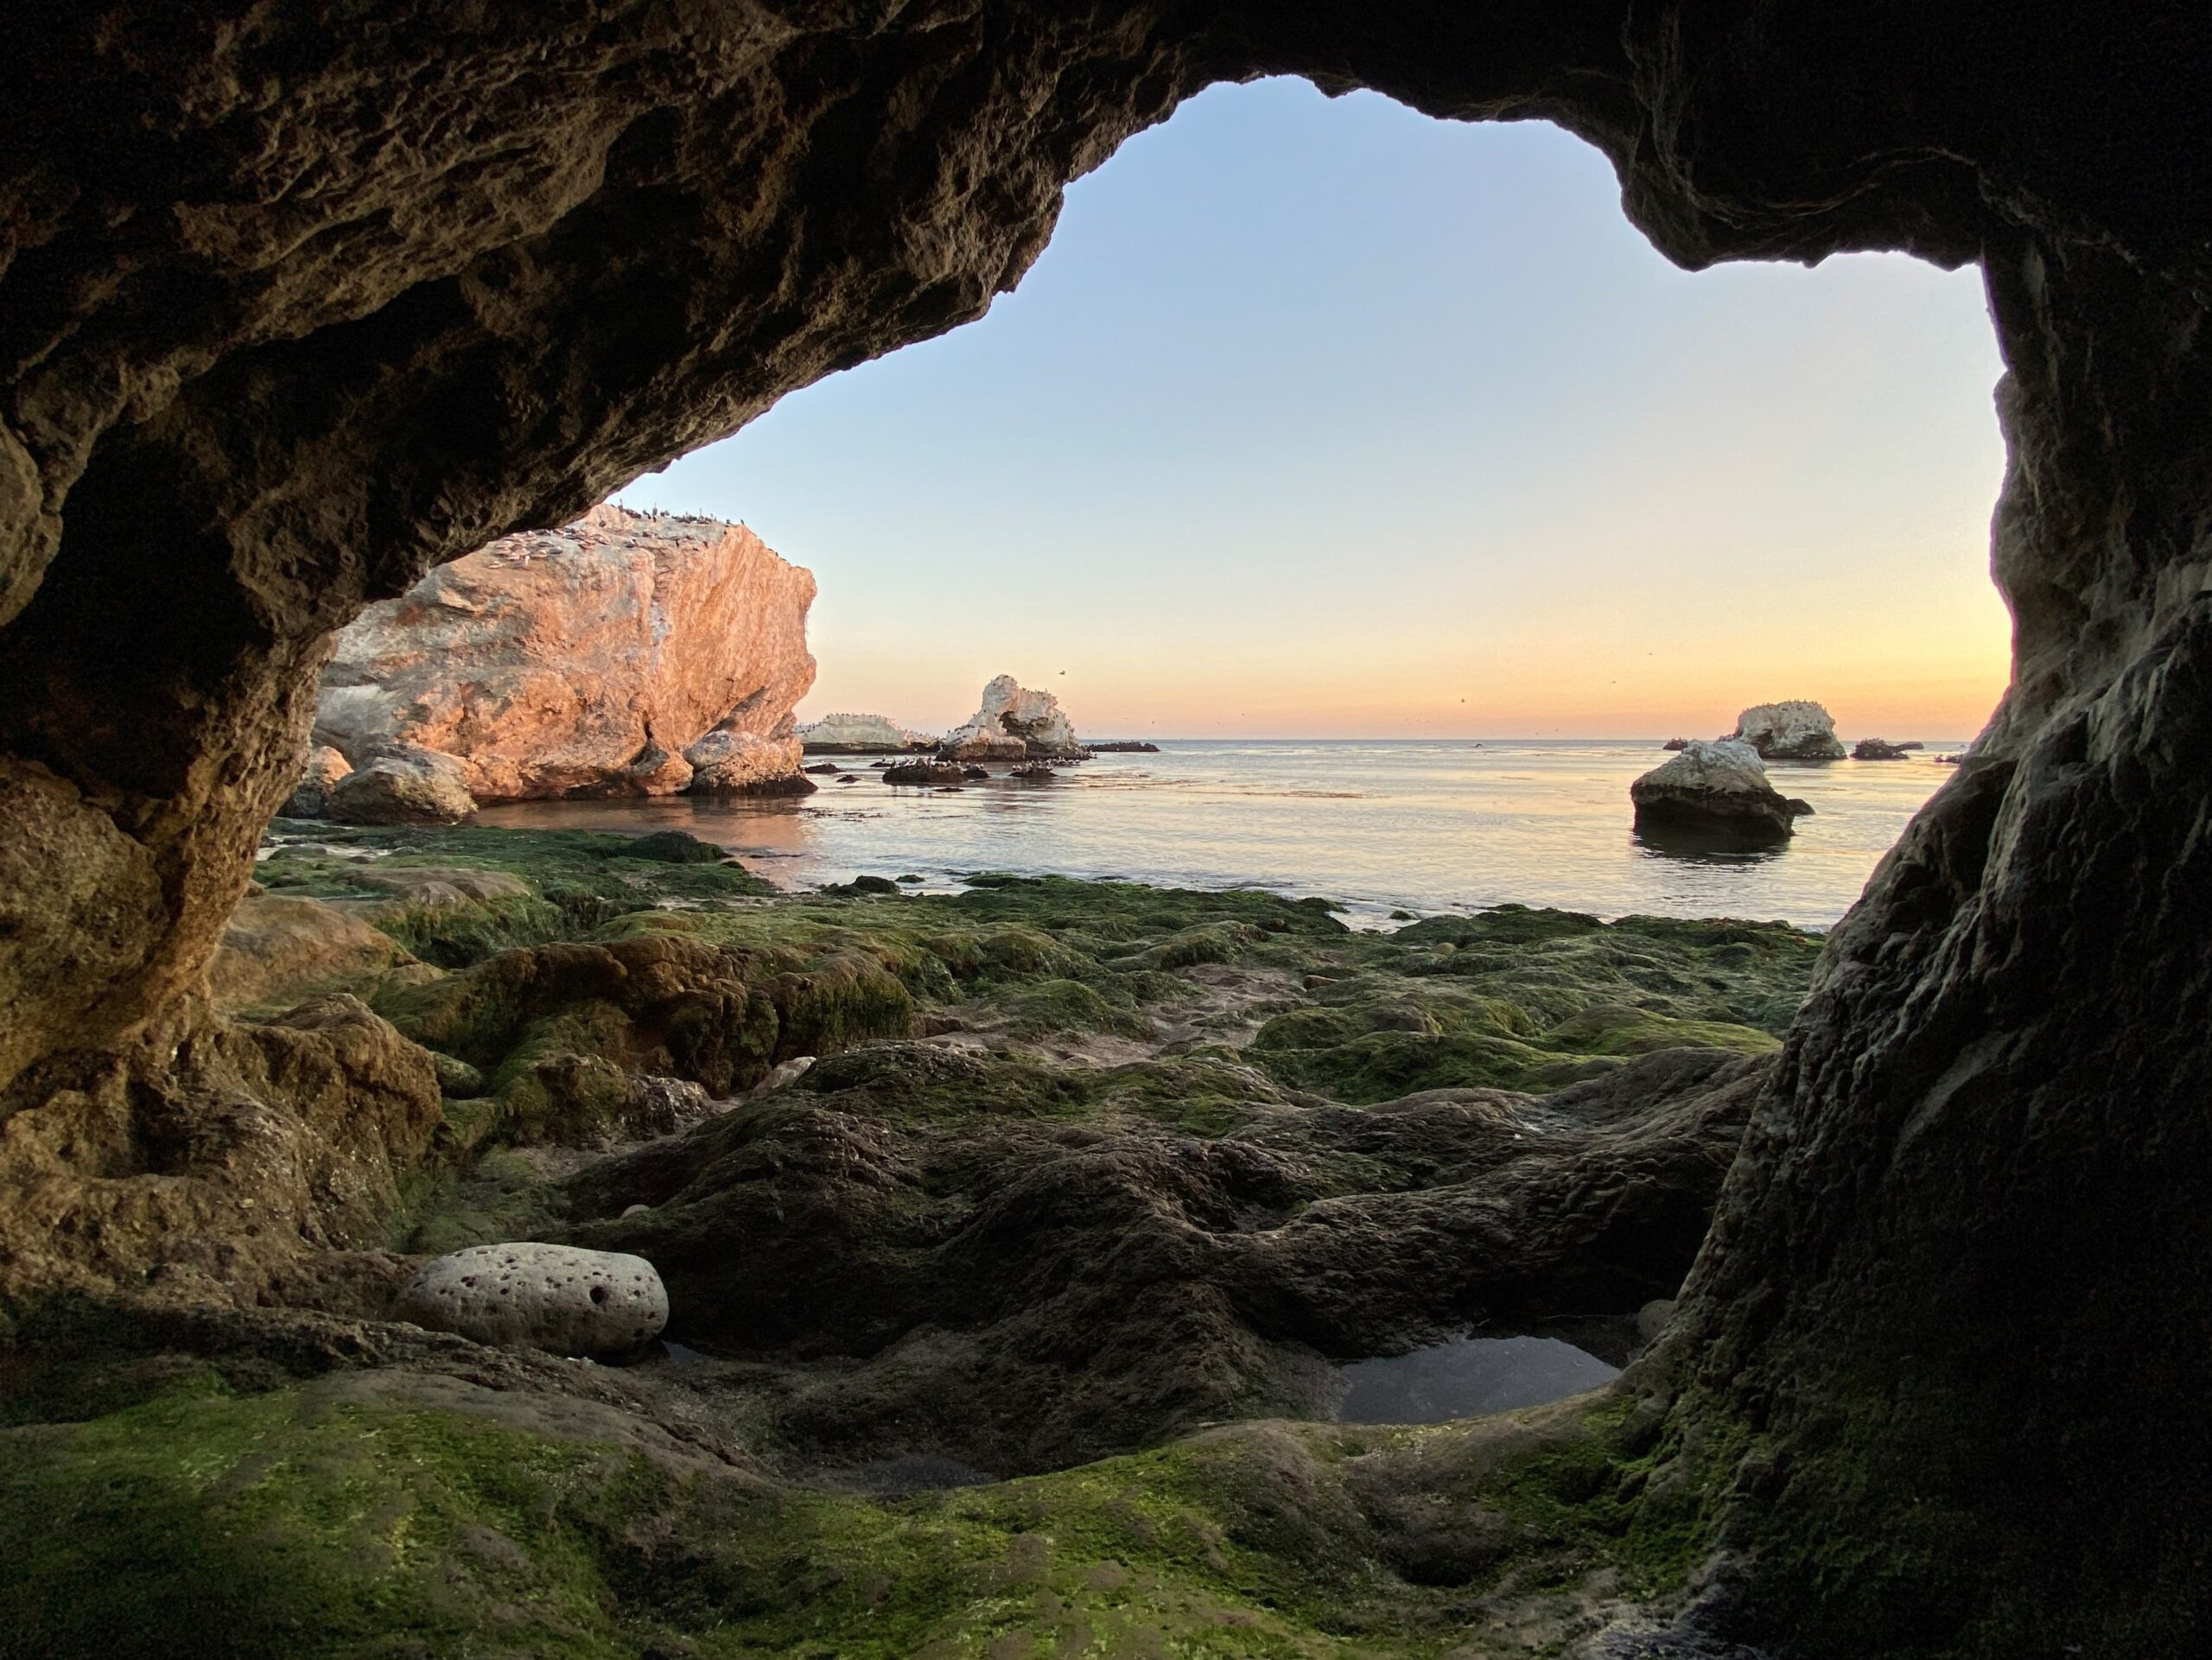 A photo of a cave opening that leads to the seashore